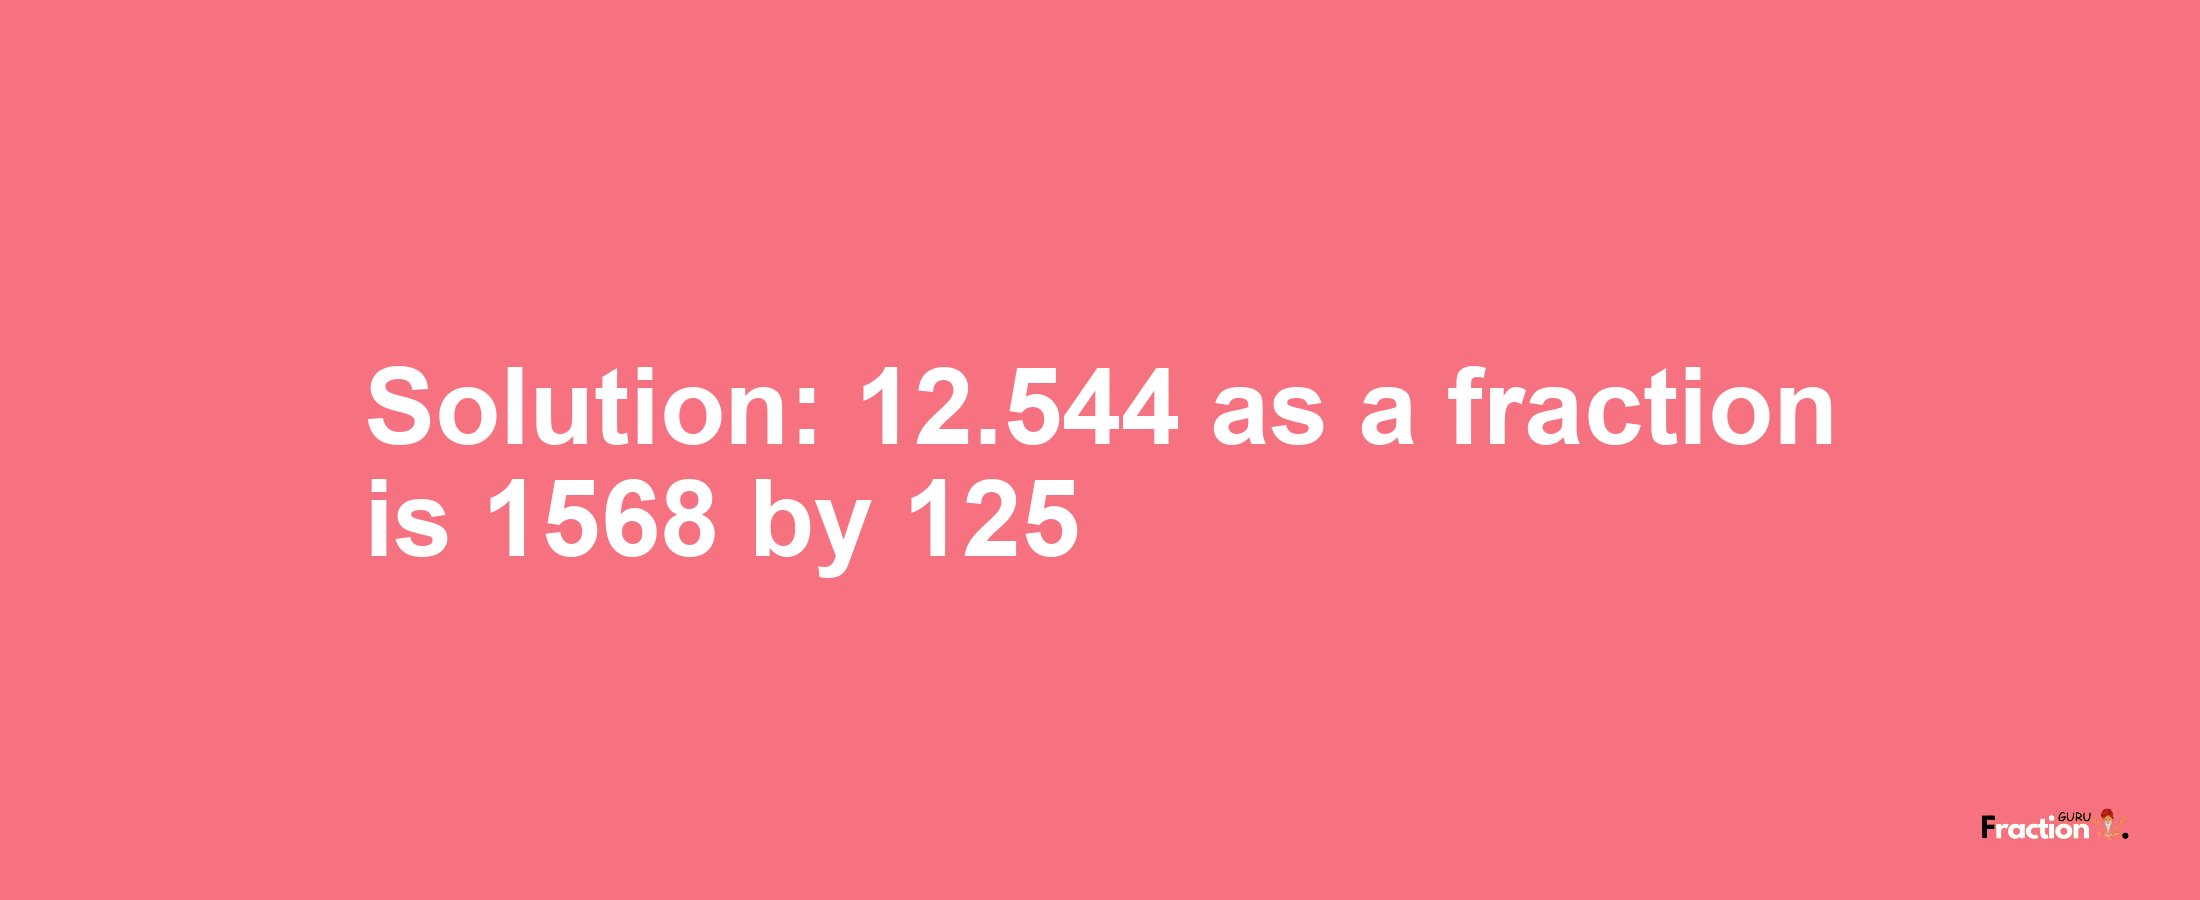 Solution:12.544 as a fraction is 1568/125